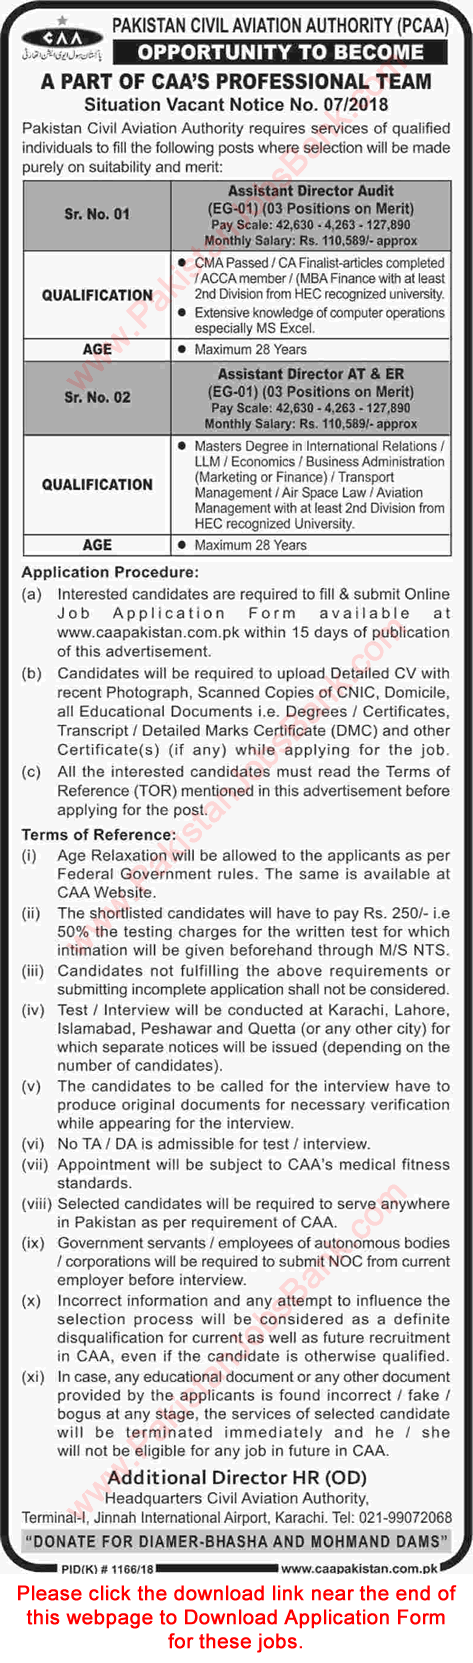 Assistant Director Jobs in Civil Aviation Authority Pakistan 2018 September / October Application Form Latest